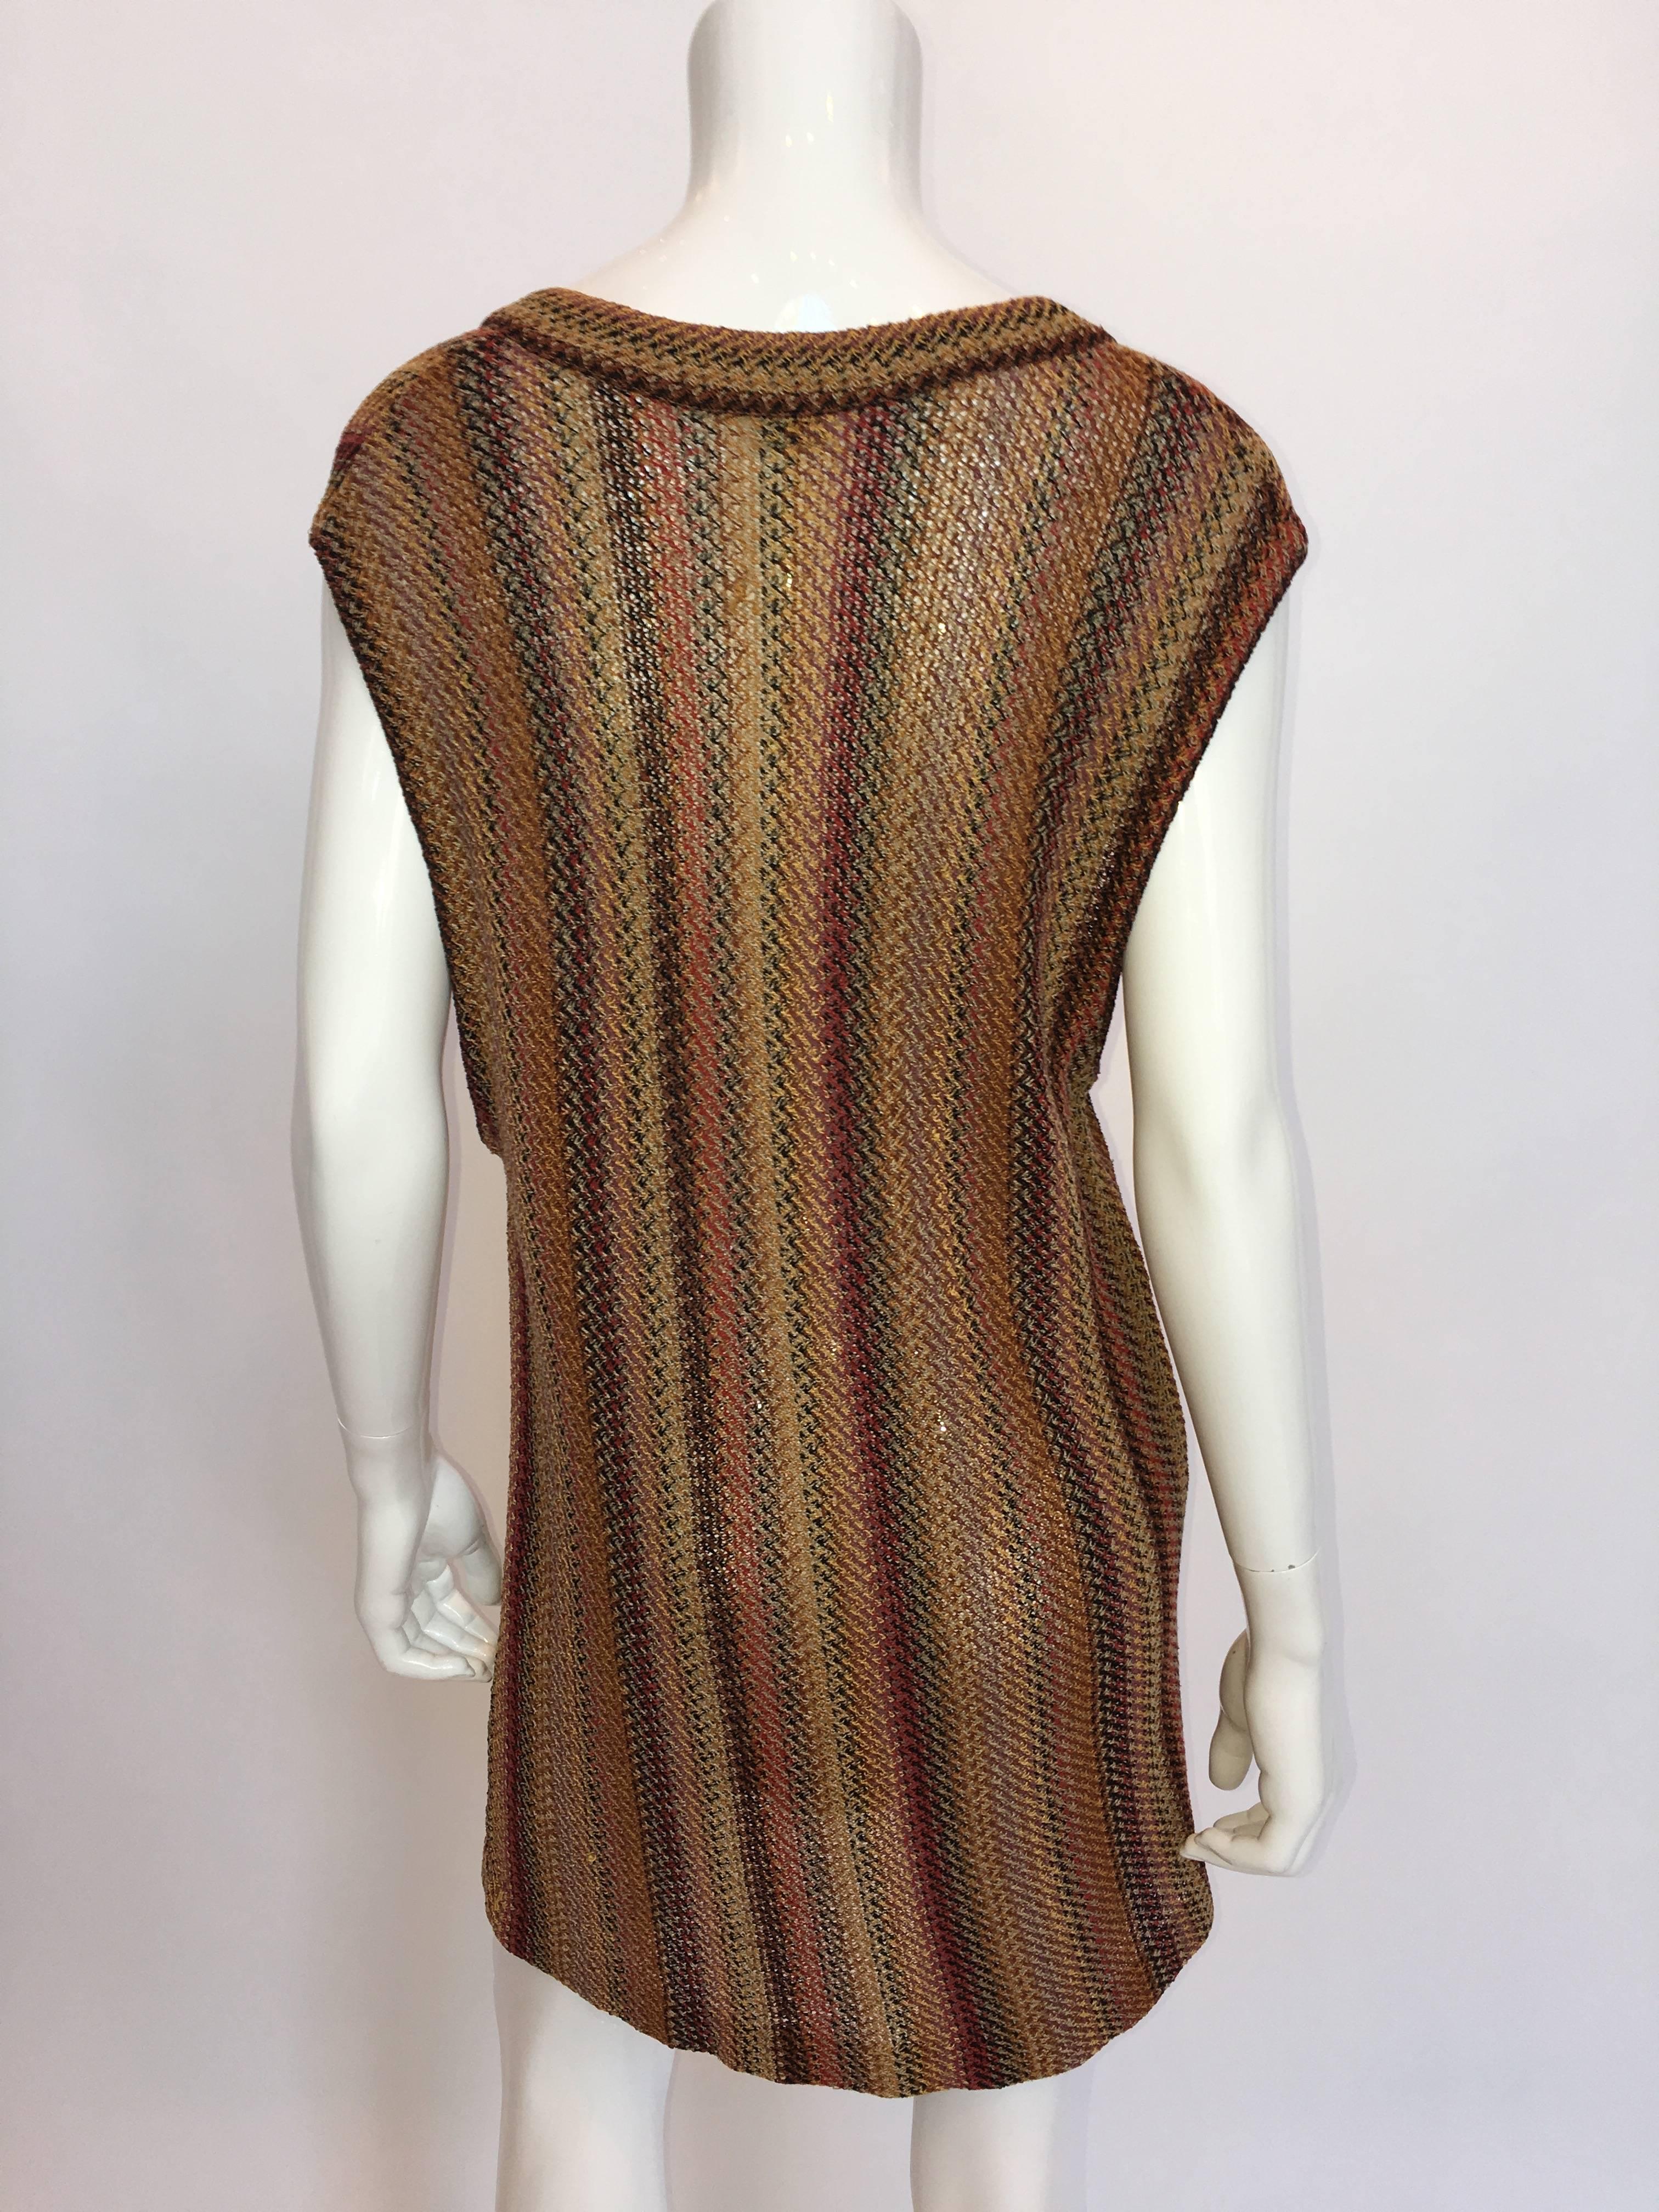 Missoni Knit Vest Dress In Good Condition For Sale In Los Angeles, CA